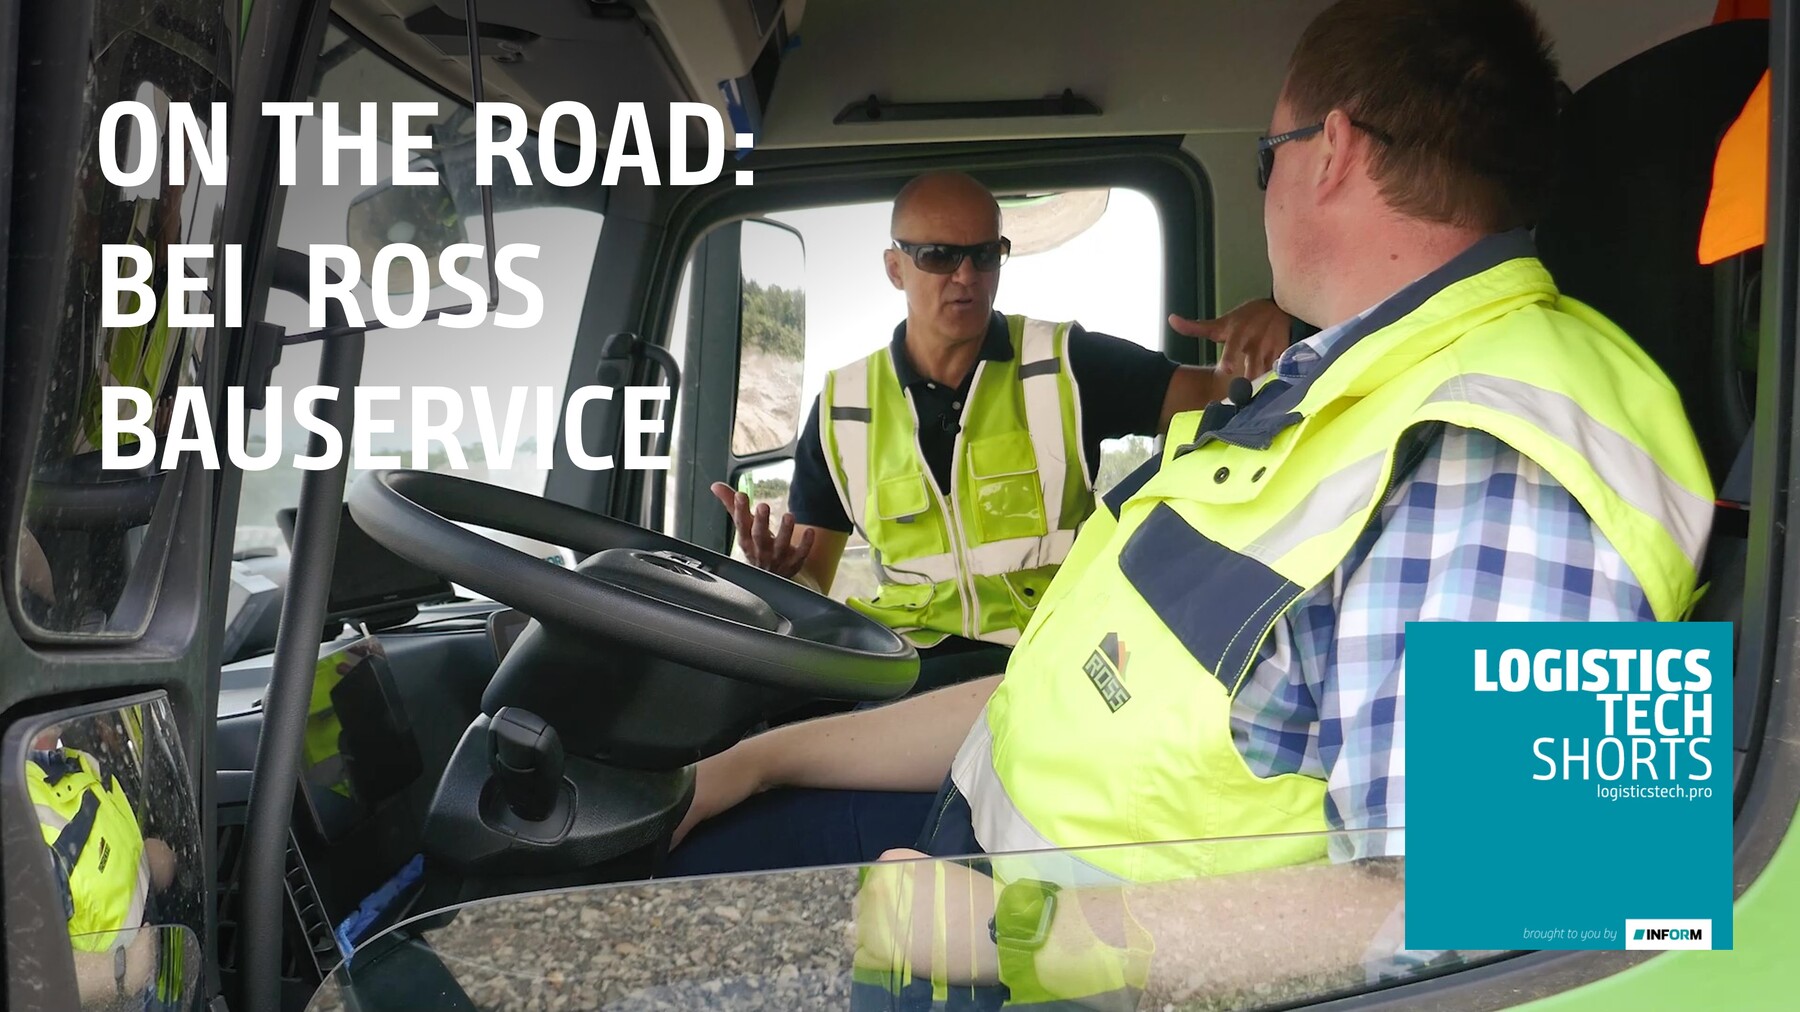 Logistics Tech Shorts on the Road: At Ross Bauservice